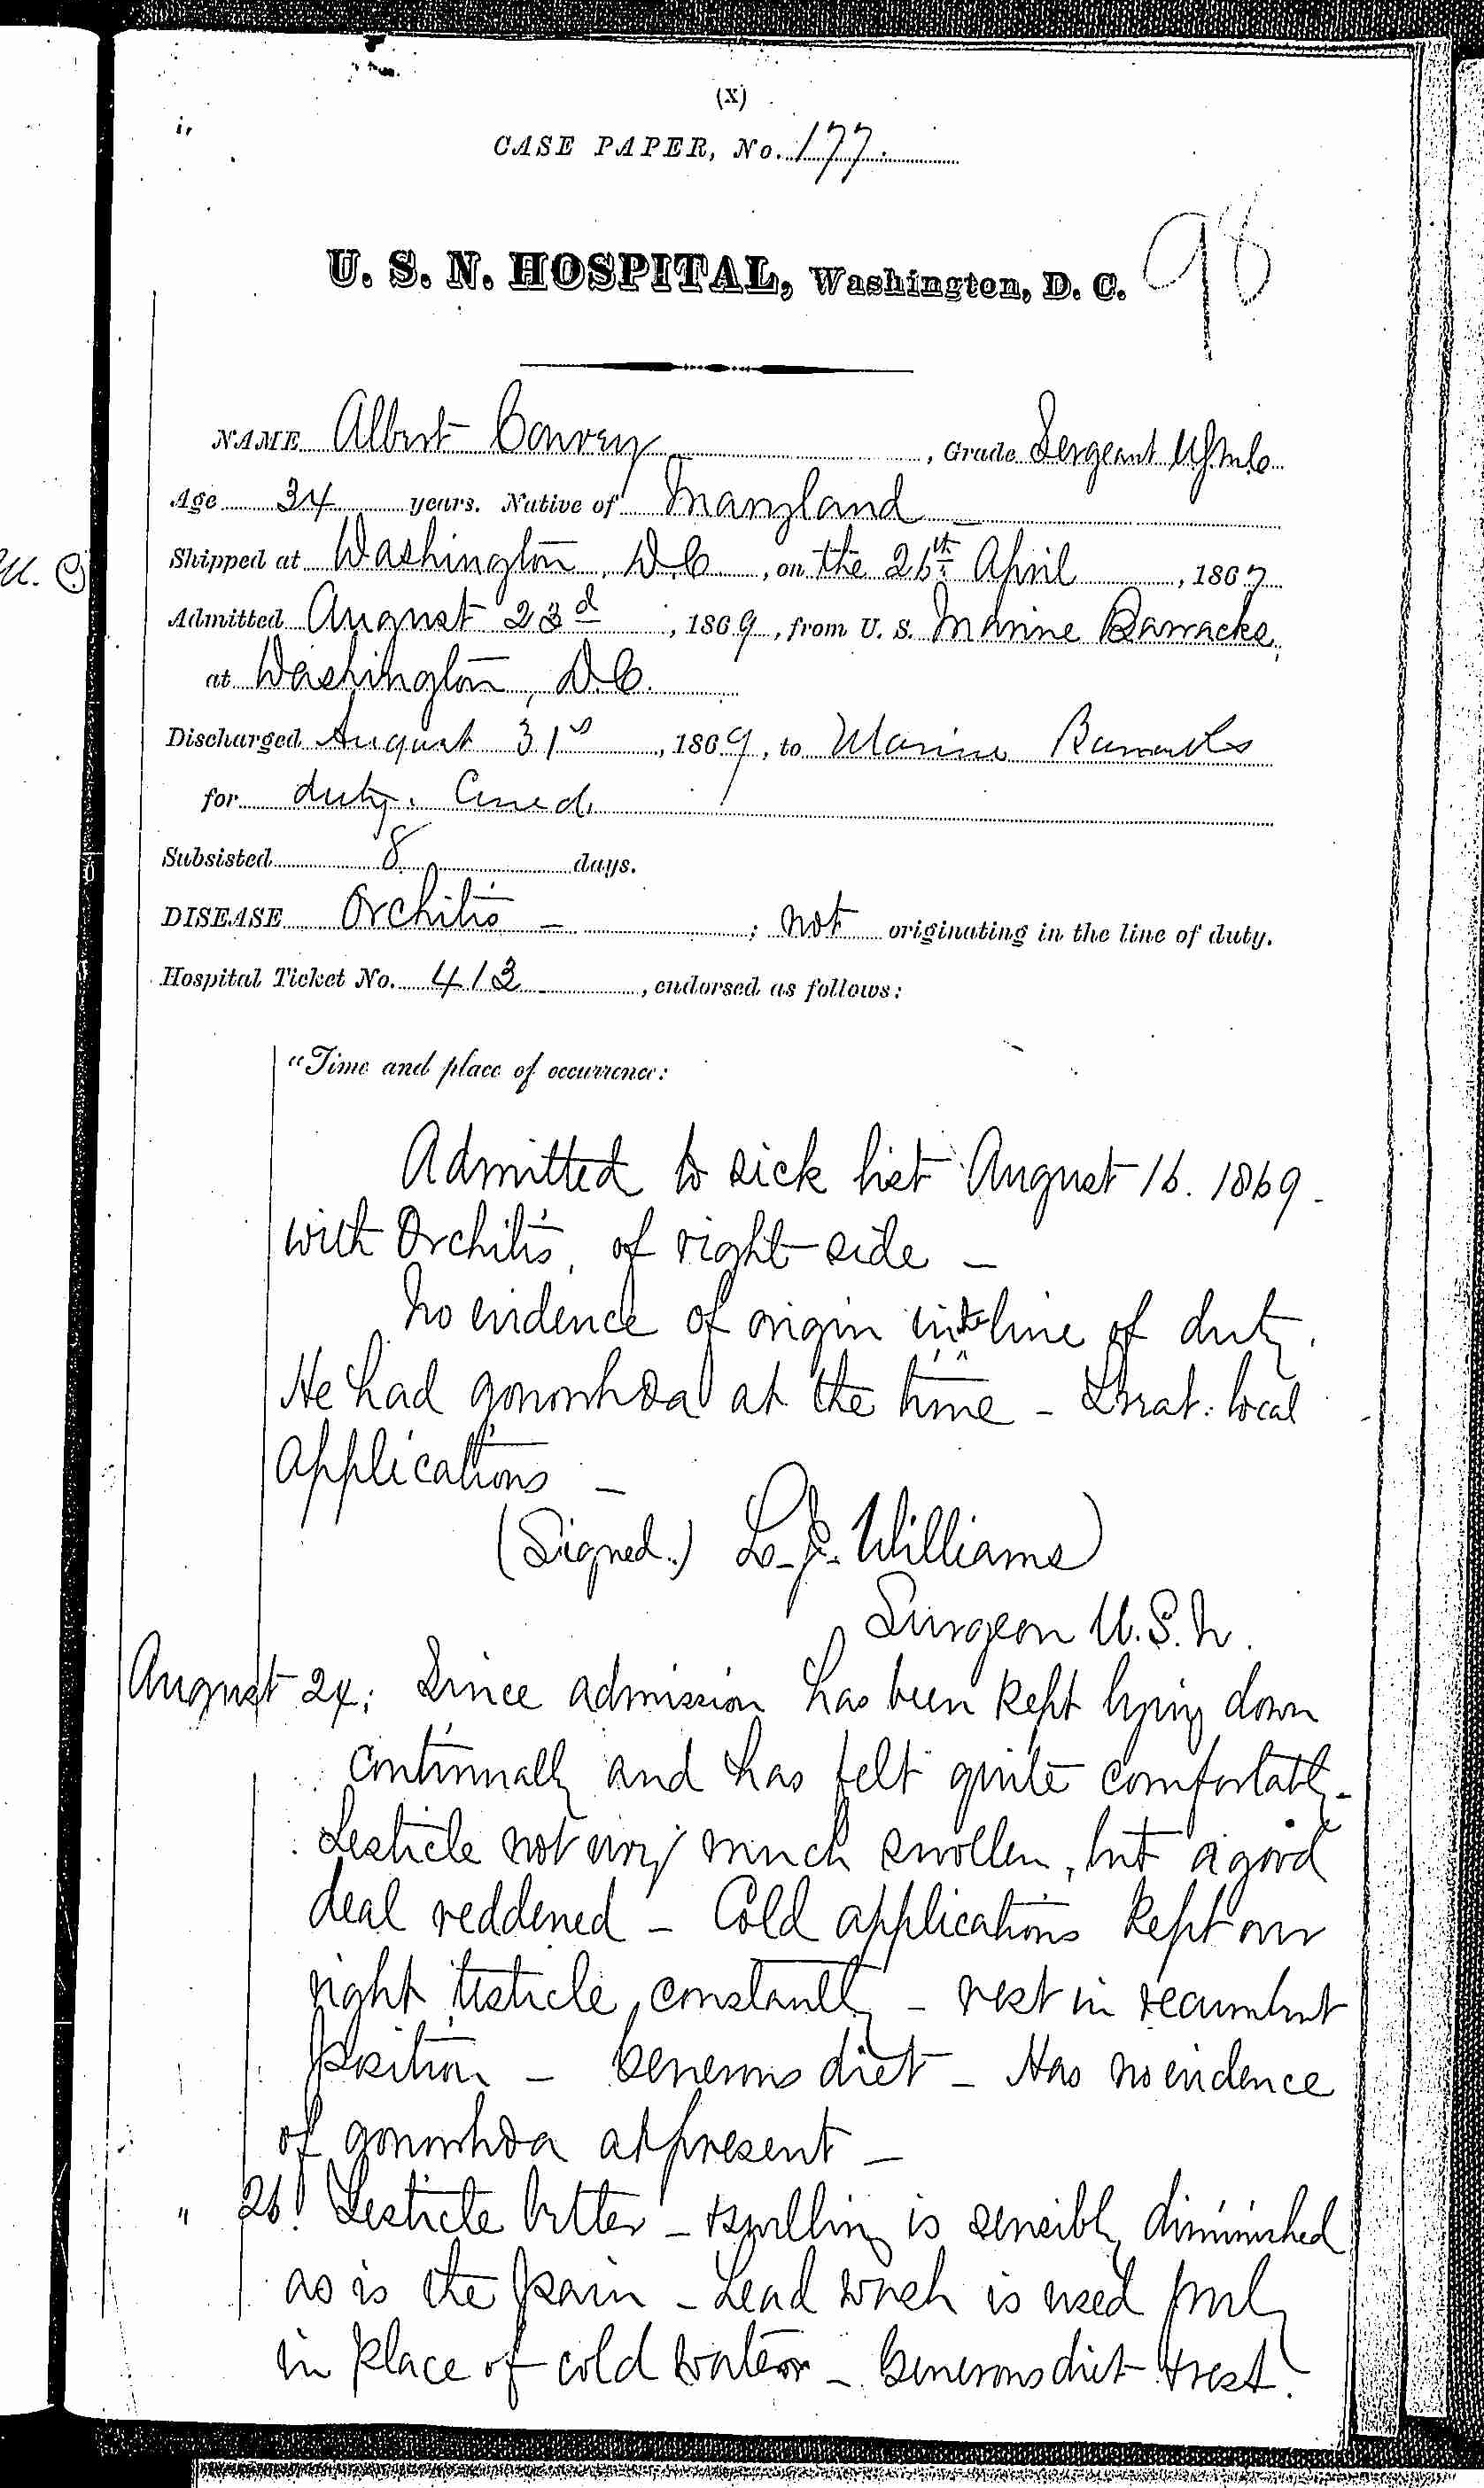 Entry for Albert Carney (page 1 of 1) in the log Hospital Tickets and Case Papers - Naval Hospital - Washington, D.C. - 1868-69